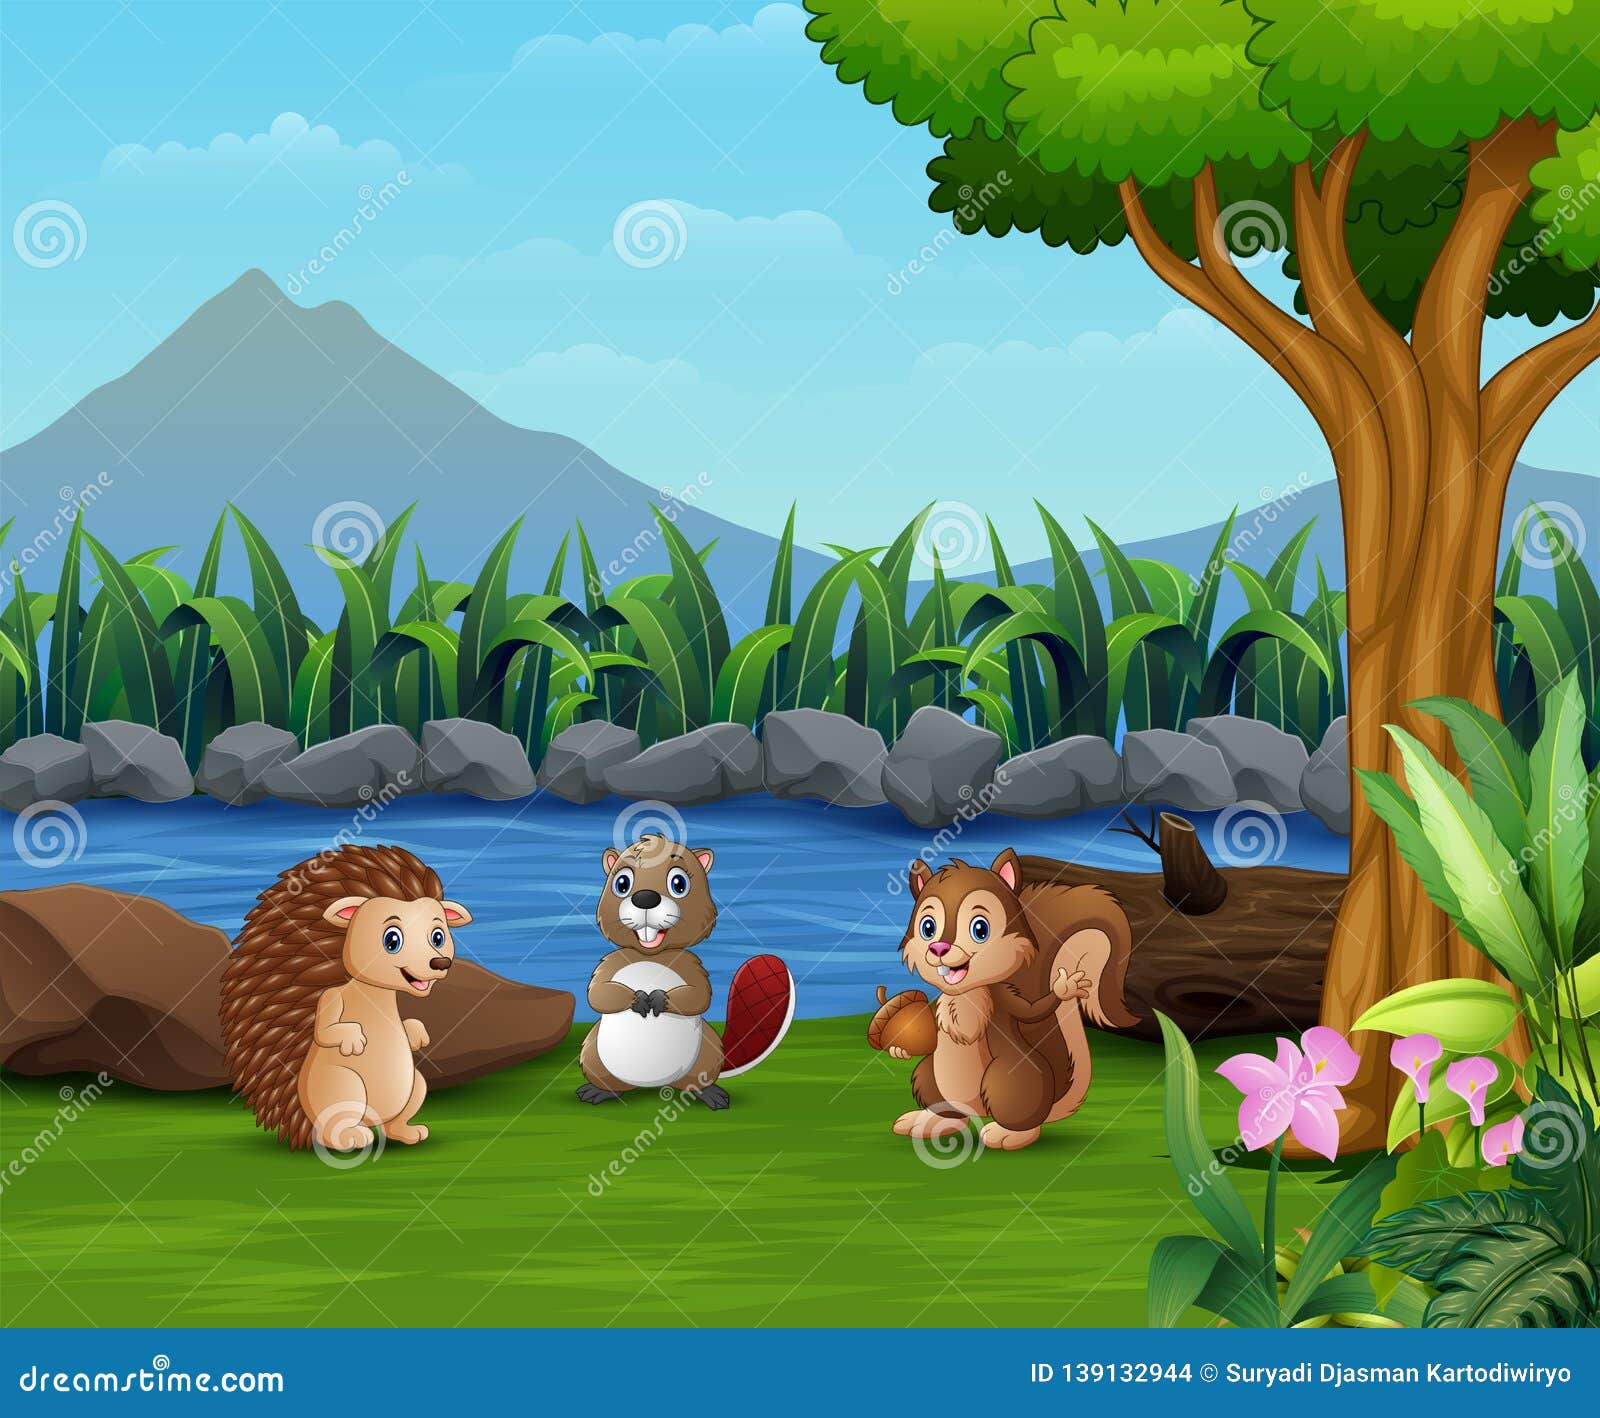 Play My pocket pet for free without downloads